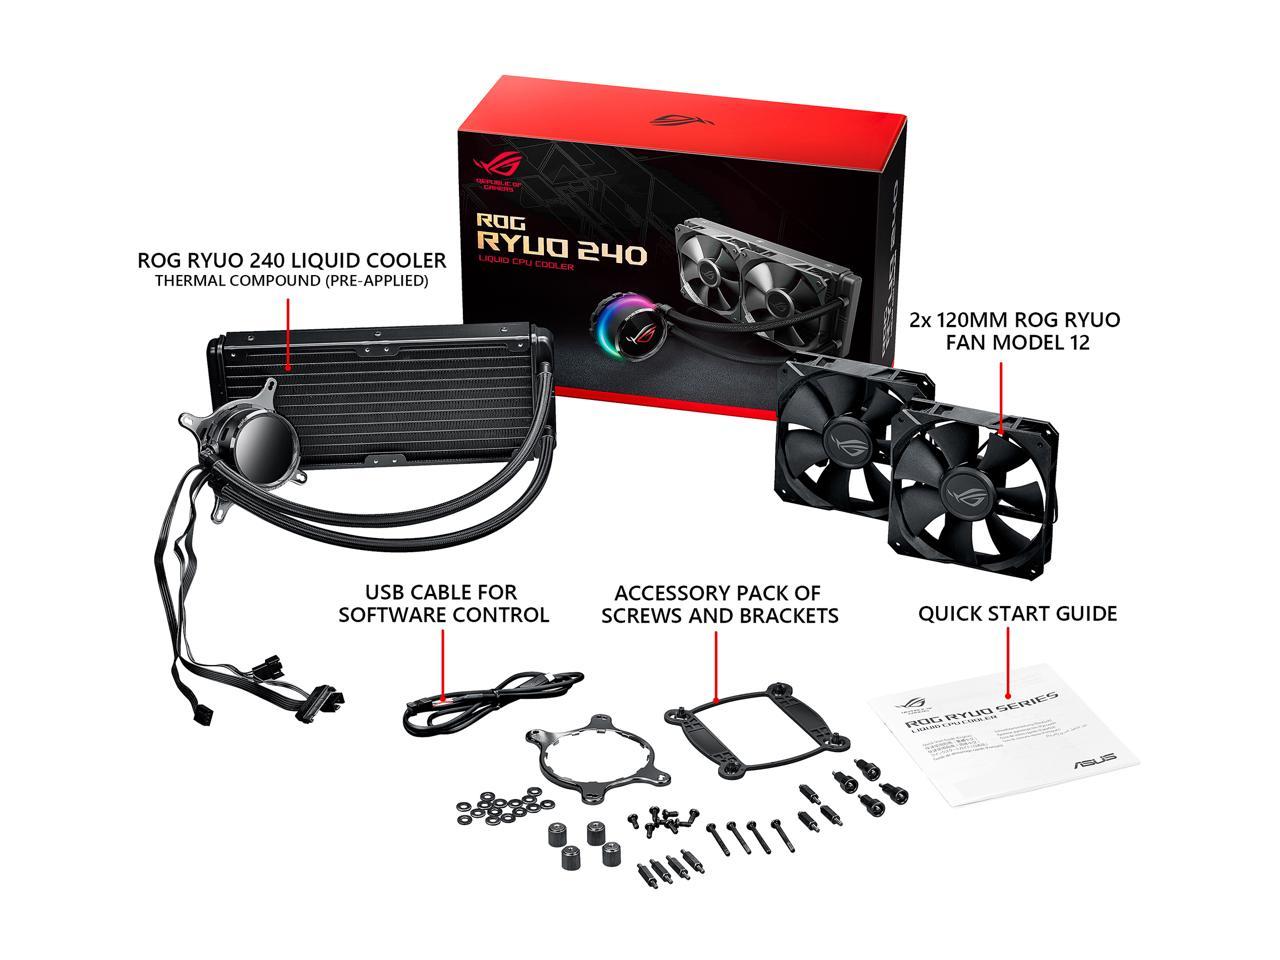 ASUS ROG Ryuo 240 RGB AIO Liquid CPU Cooler 240mm Radiator (Dual 120mm 4-pin PWM Fans) with LIVEDASH OLED Panel and FanXpert Controls, 90RC0040-M0AAY0